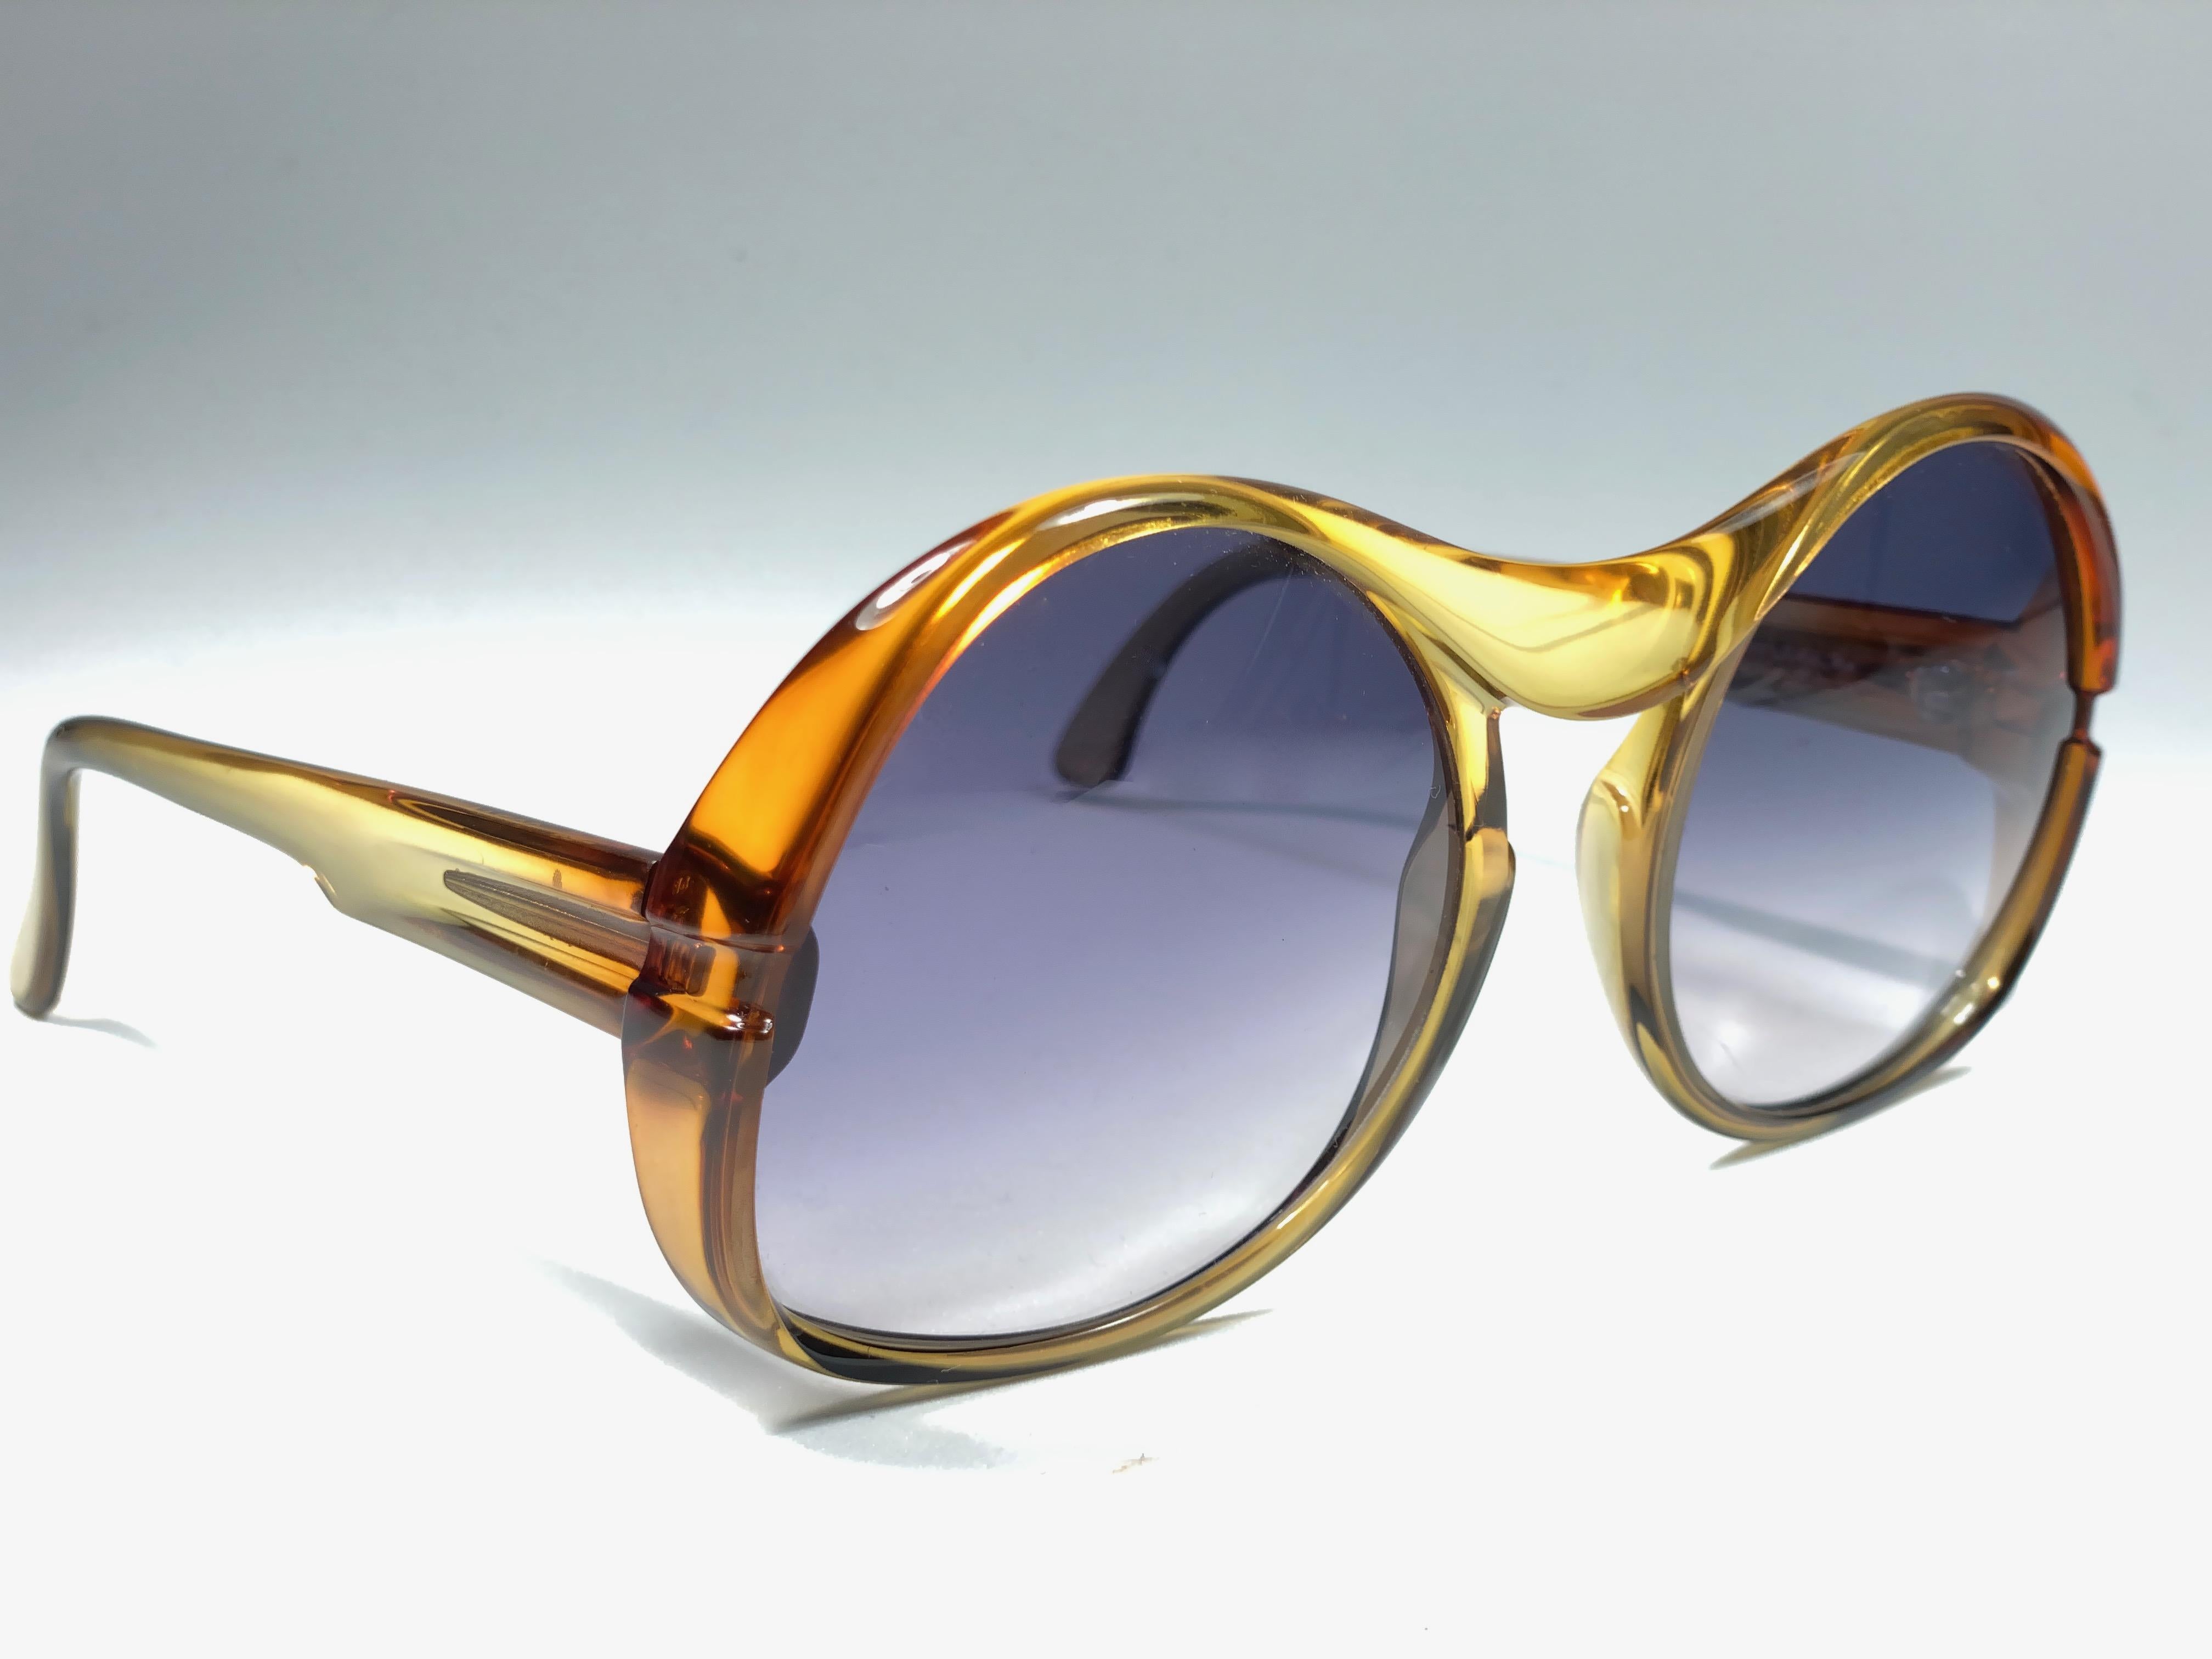 New Vintage Cobra 3032 Two Tone Optyl Sunglasses In Excellent Condition For Sale In Baleares, Baleares